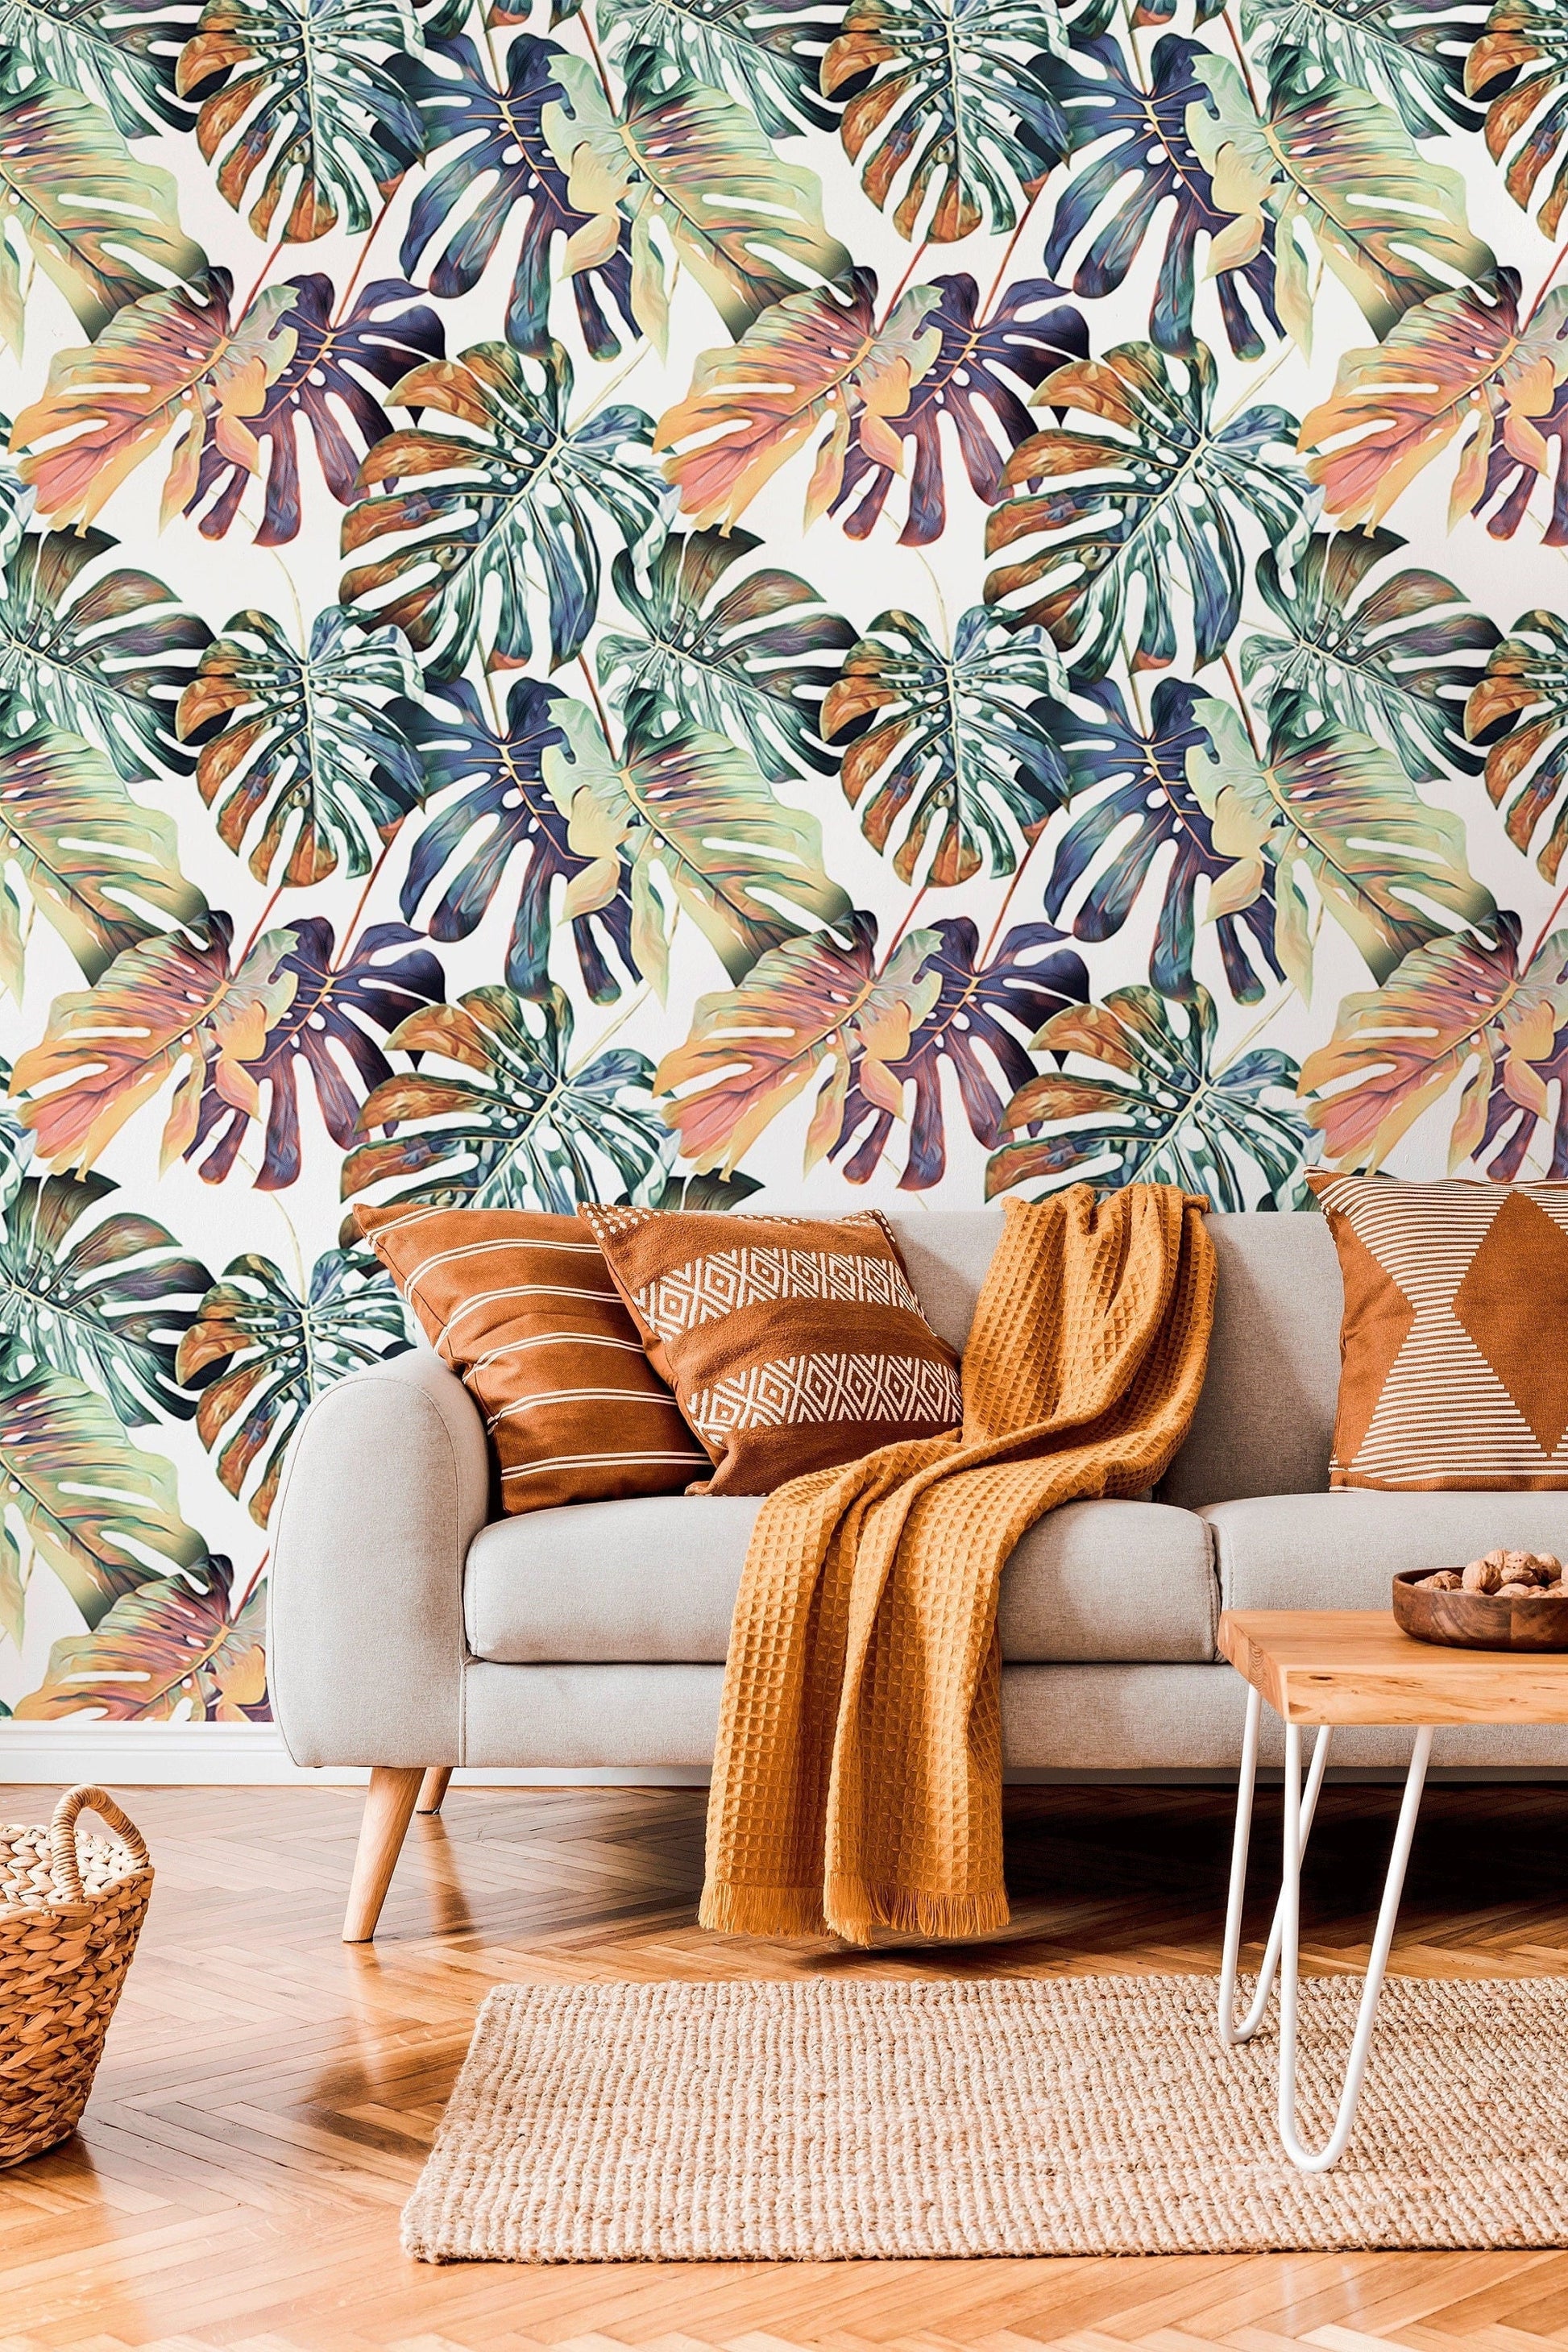 Monstera Leaf Wallpaper, Removable Wall Decor, Peel and Stick Wallpaper, Fabric Wallpaper, Removable Wallpaper, Wall Paper Removable - B092